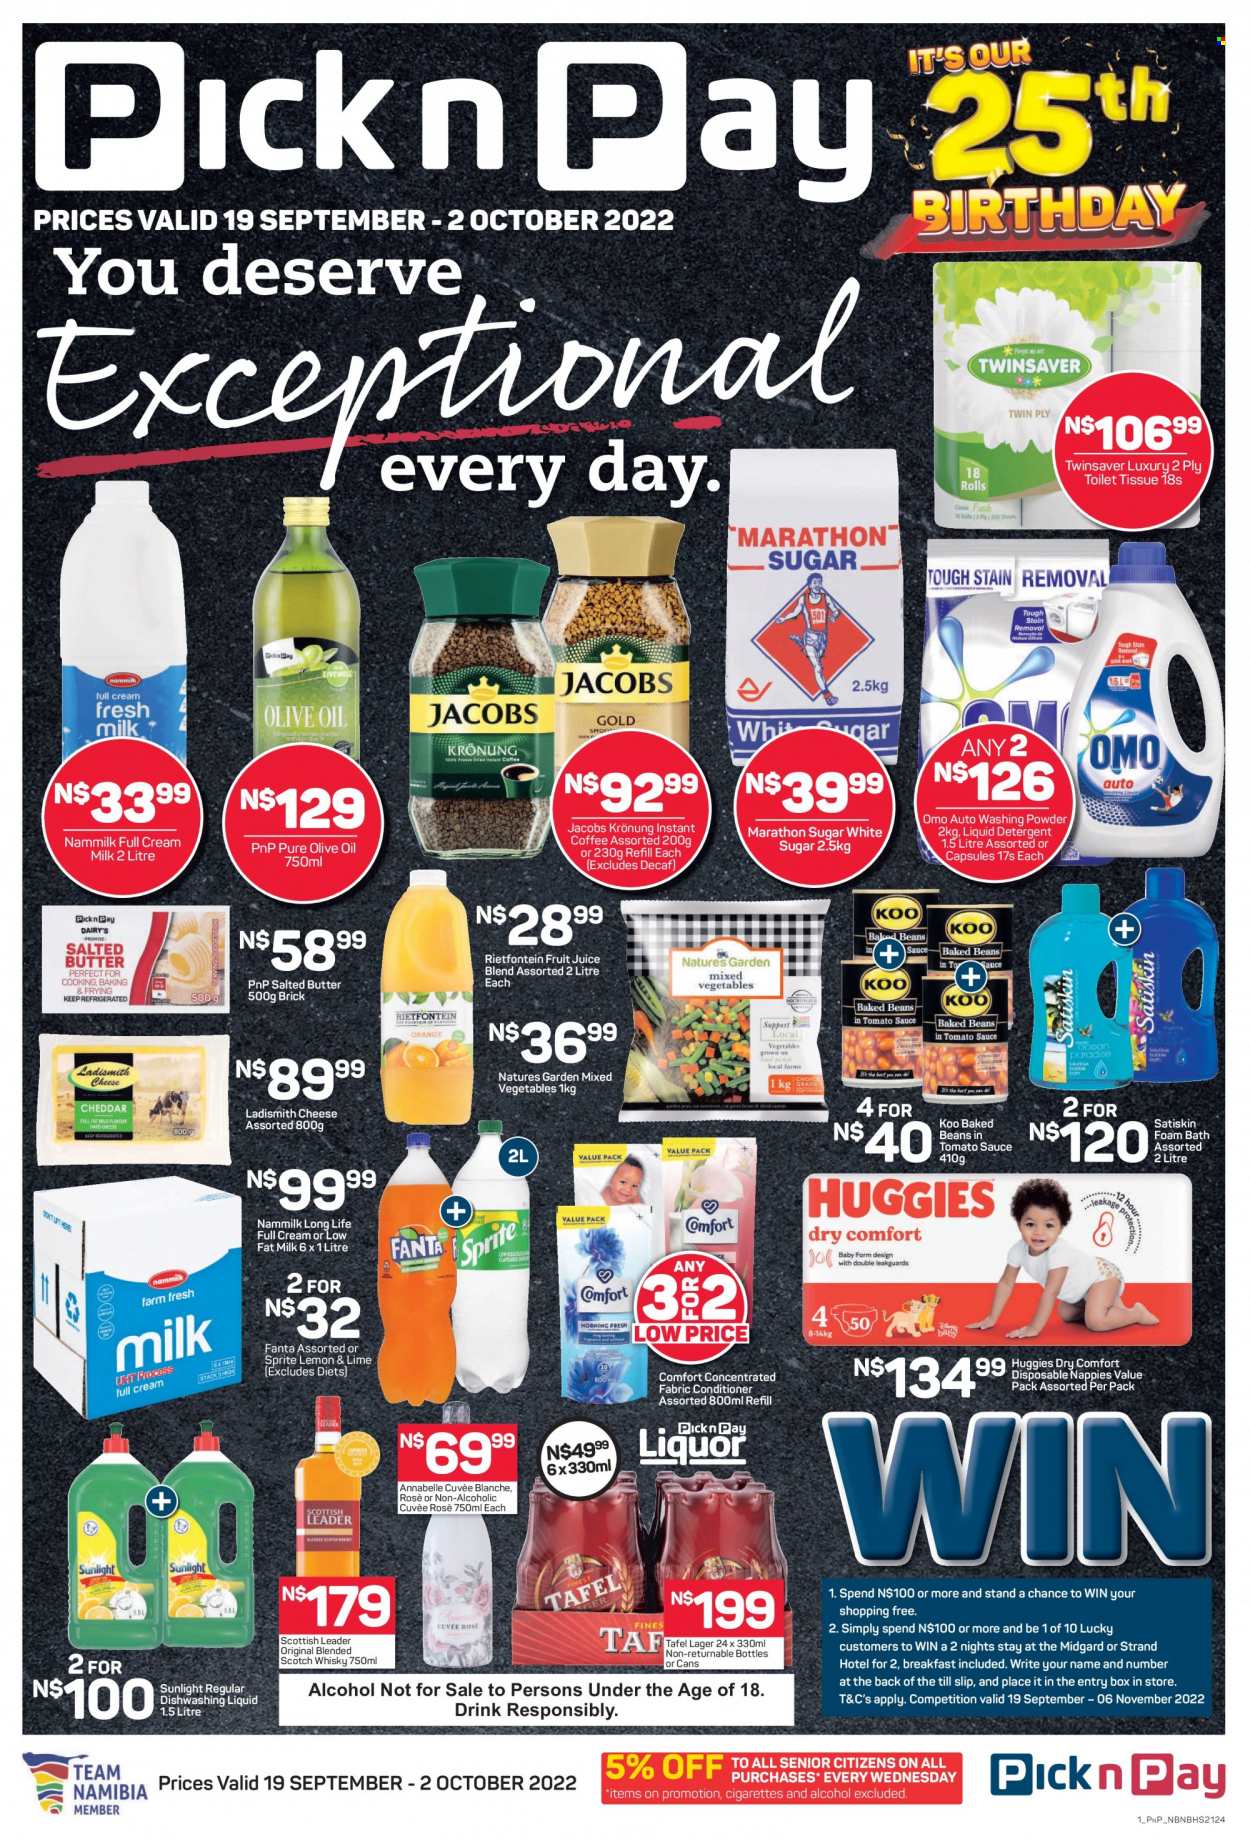 thumbnail - Pick n Pay catalogue  - 19/09/2022 - 02/10/2022 - Sales products - cheese, butter, Ladismith, salted butter, mixed vegetables, Natures Garden, sugar, baked beans, Koo, olive oil, oil, Sprite, Fanta, fruit juice, juice, instant coffee, Jacobs, Jacobs Krönung, Cuvée, alcohol, rosé wine, scotch whisky, whisky, beer, Lager, Huggies, nappies, detergent, Omo, liquid detergent, laundry powder, Sunlight, dishwashing liquid, bath foam, Satiskin. Page 1.